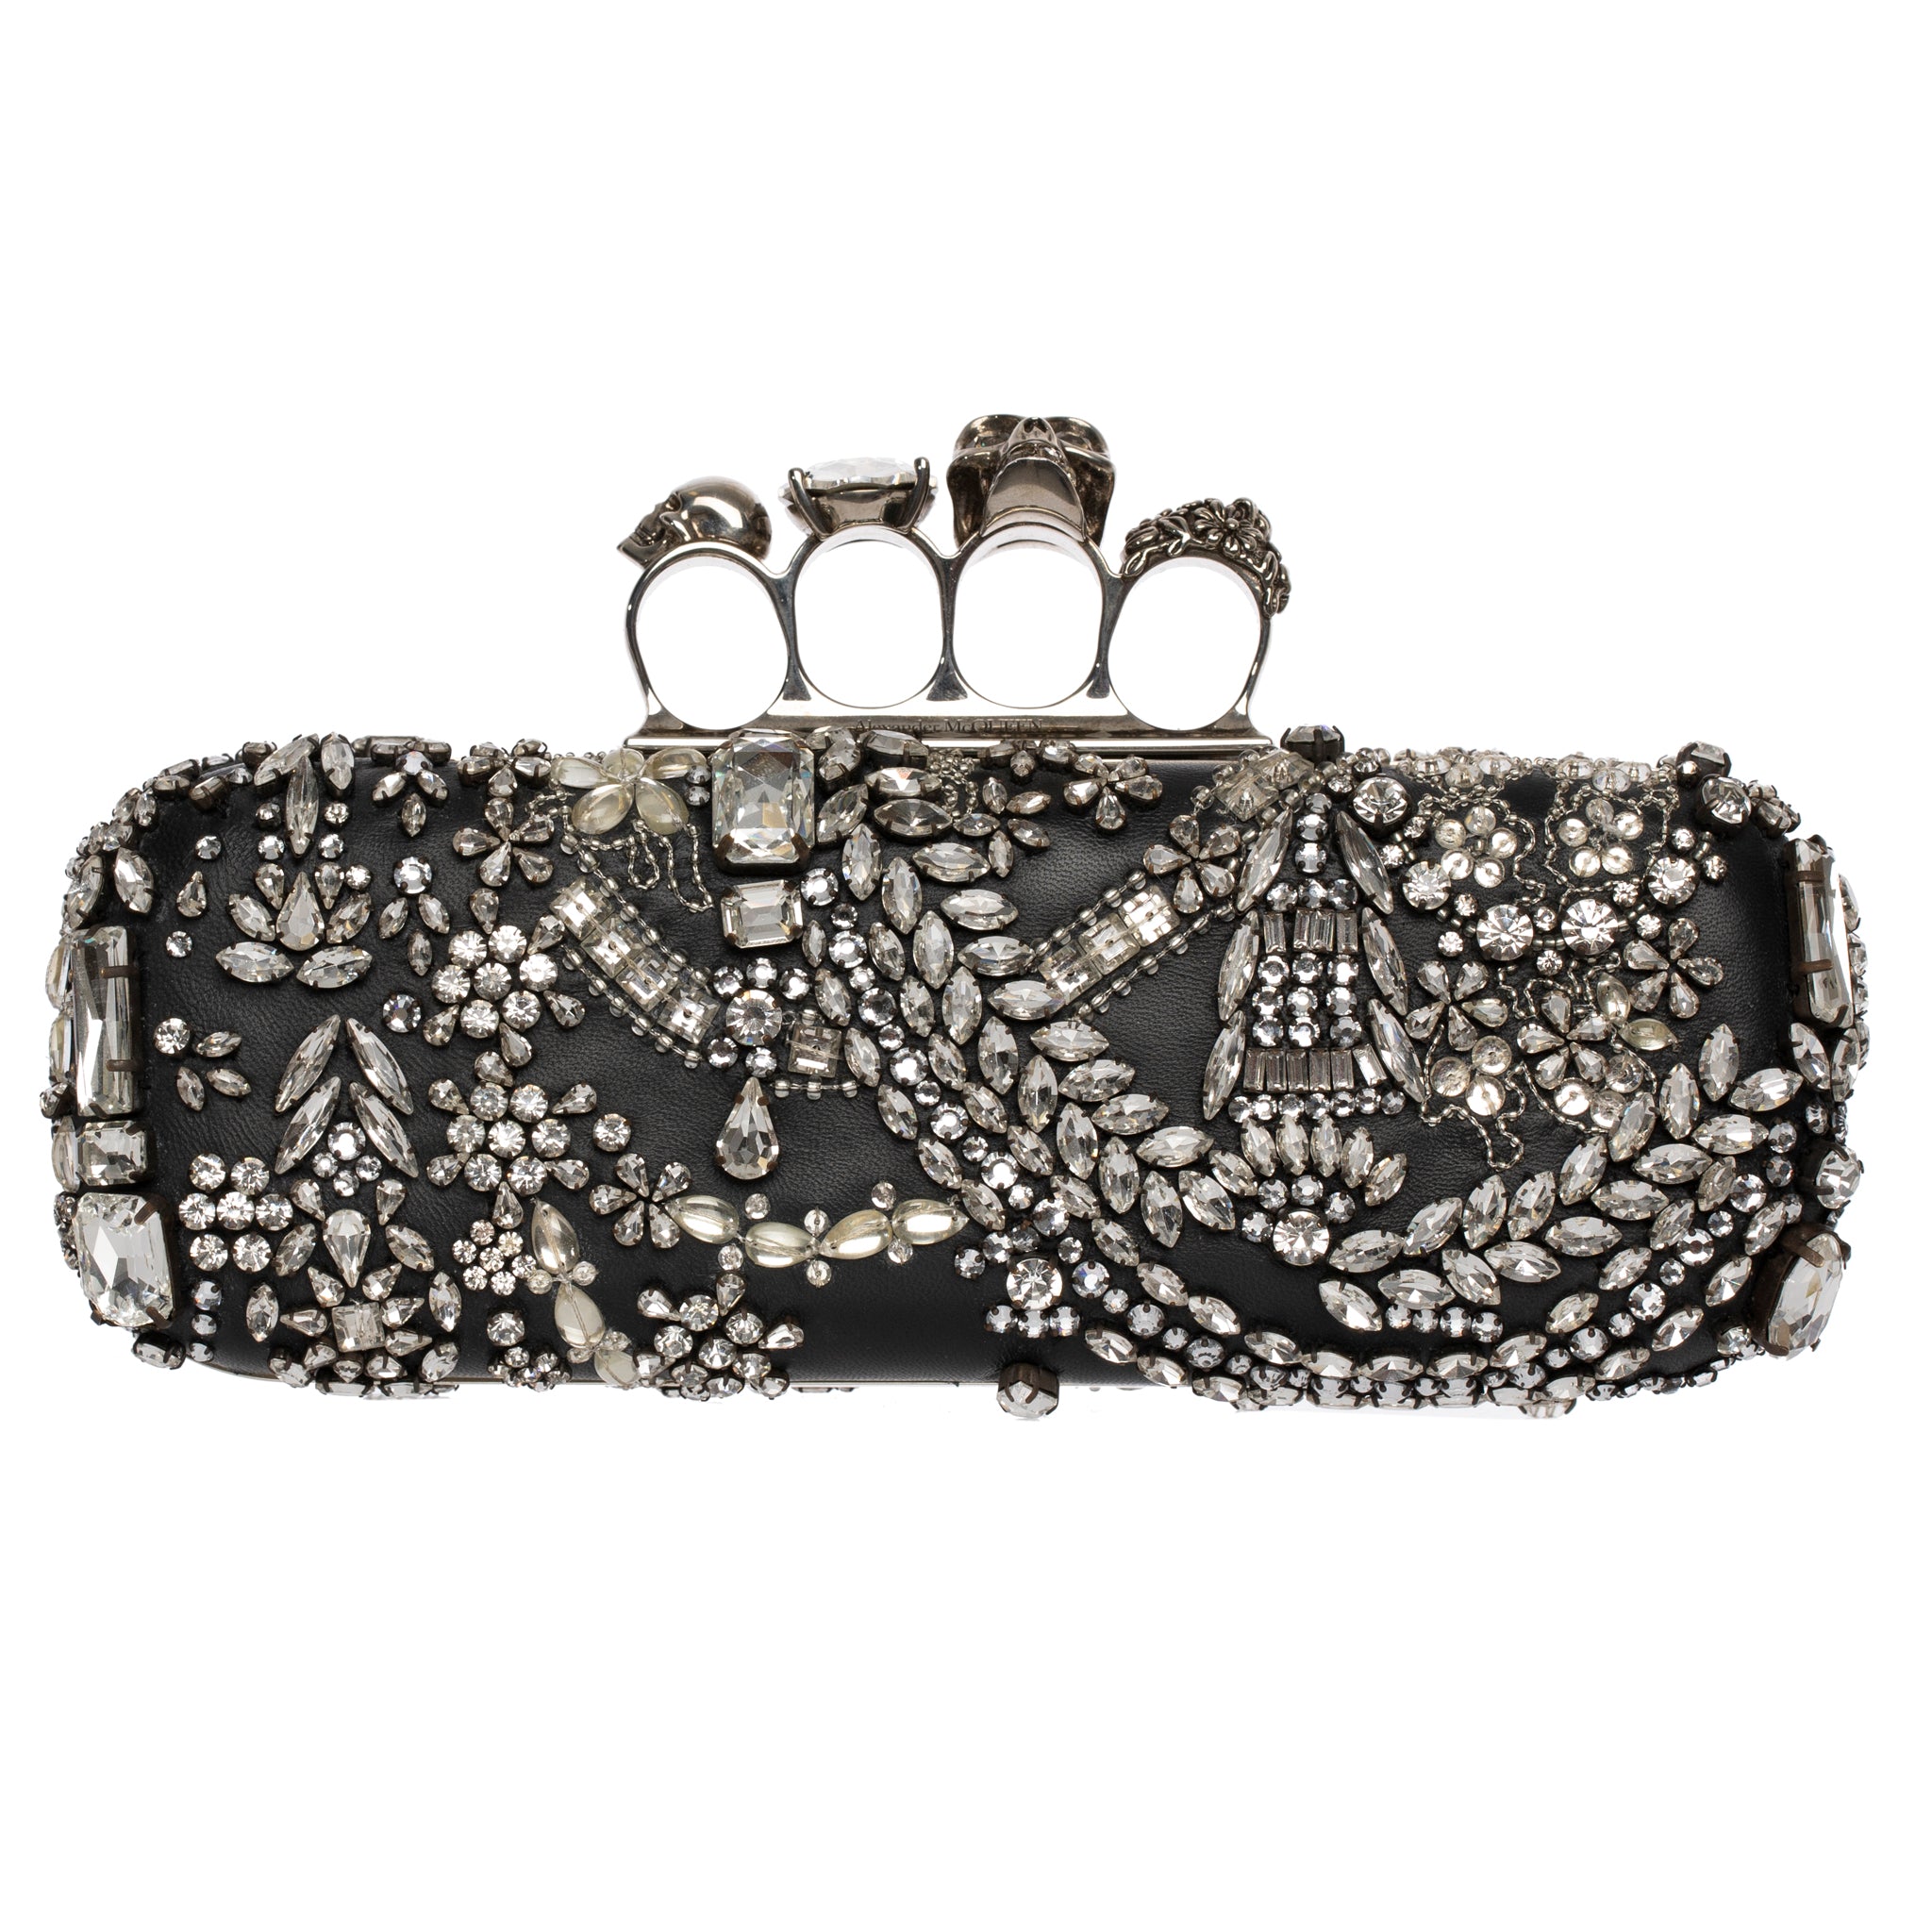 Alexander McQueen Knuckle Clutch in Black With Crystal Silver Tone Hardware